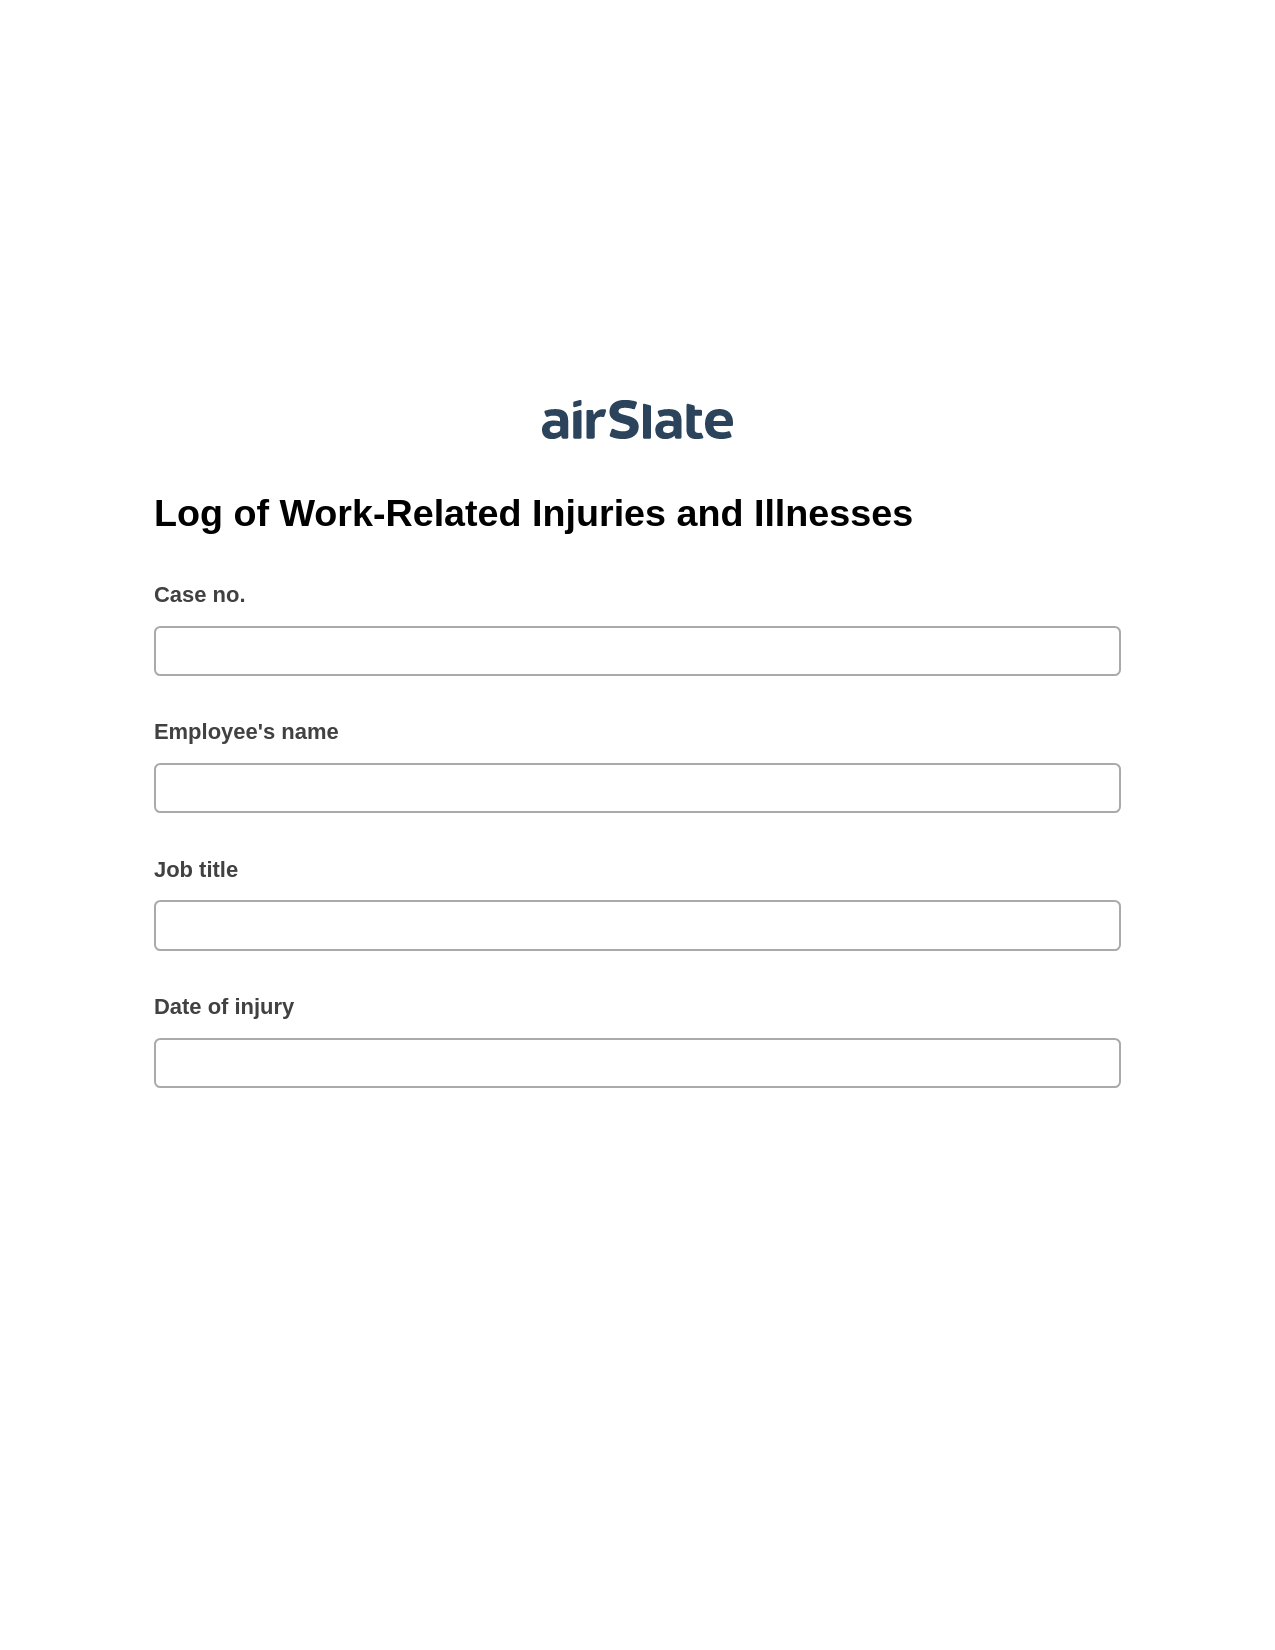 Log of Work-Related Injuries and Illnesses Pre-fill from Salesforce Record Bot, Google Cloud Print Bot, Export to Smartsheet